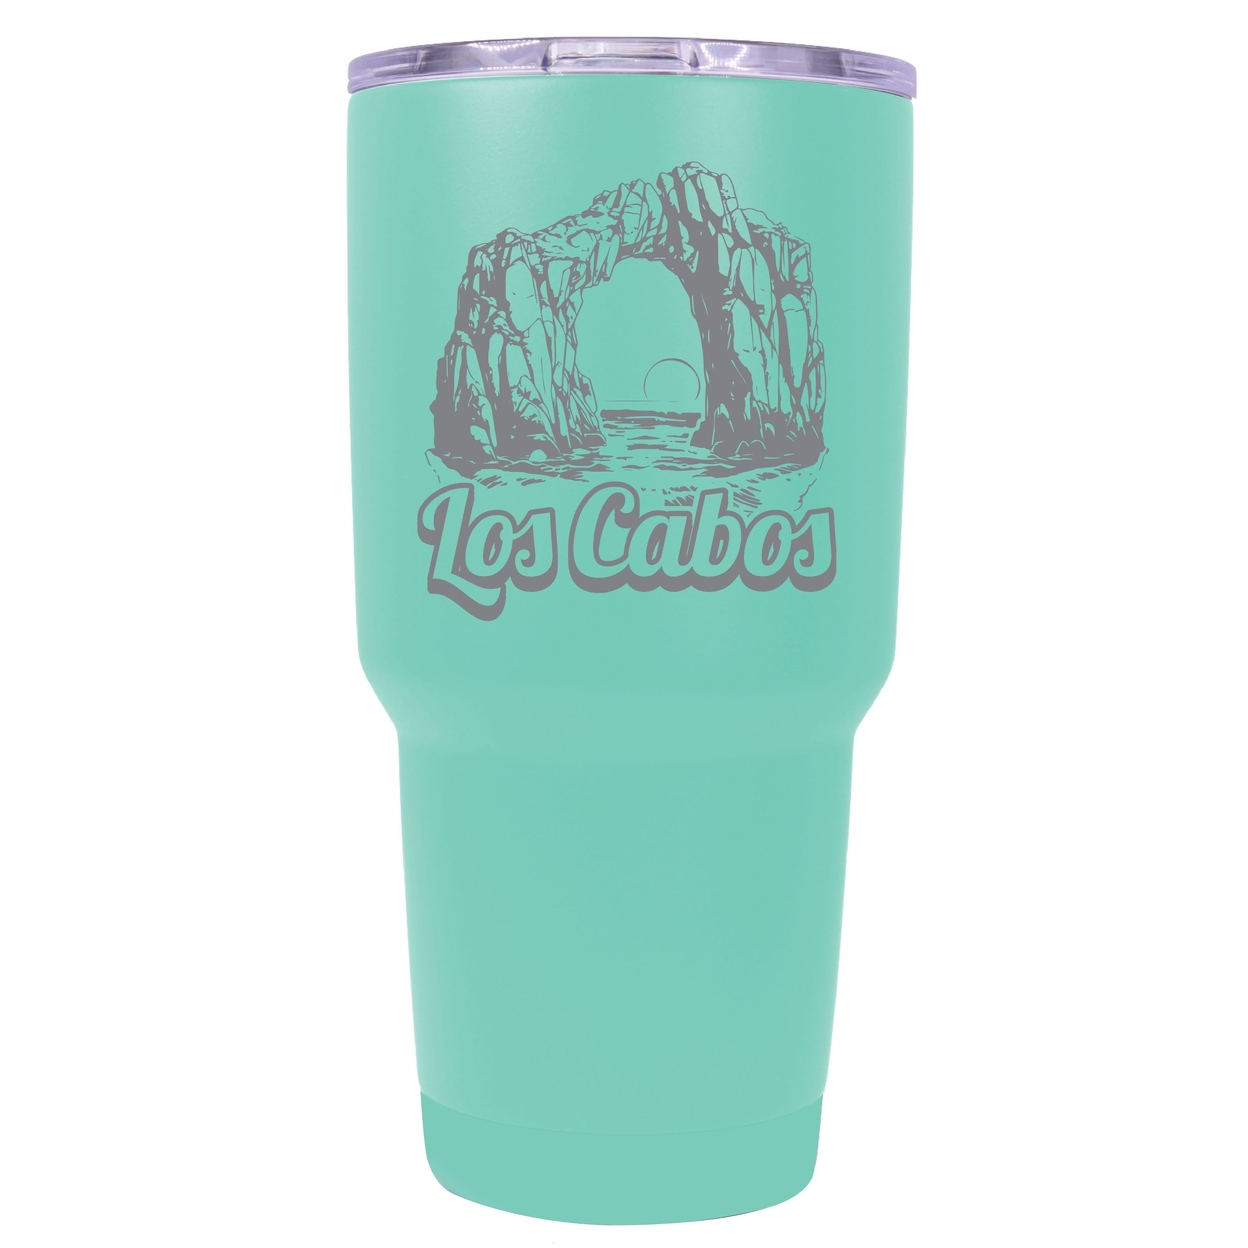 Los Cabos Mexico Souvenir 24 Oz Engraved Insulated Stainless Steel Tumbler - Rose Gold,,2-Pack